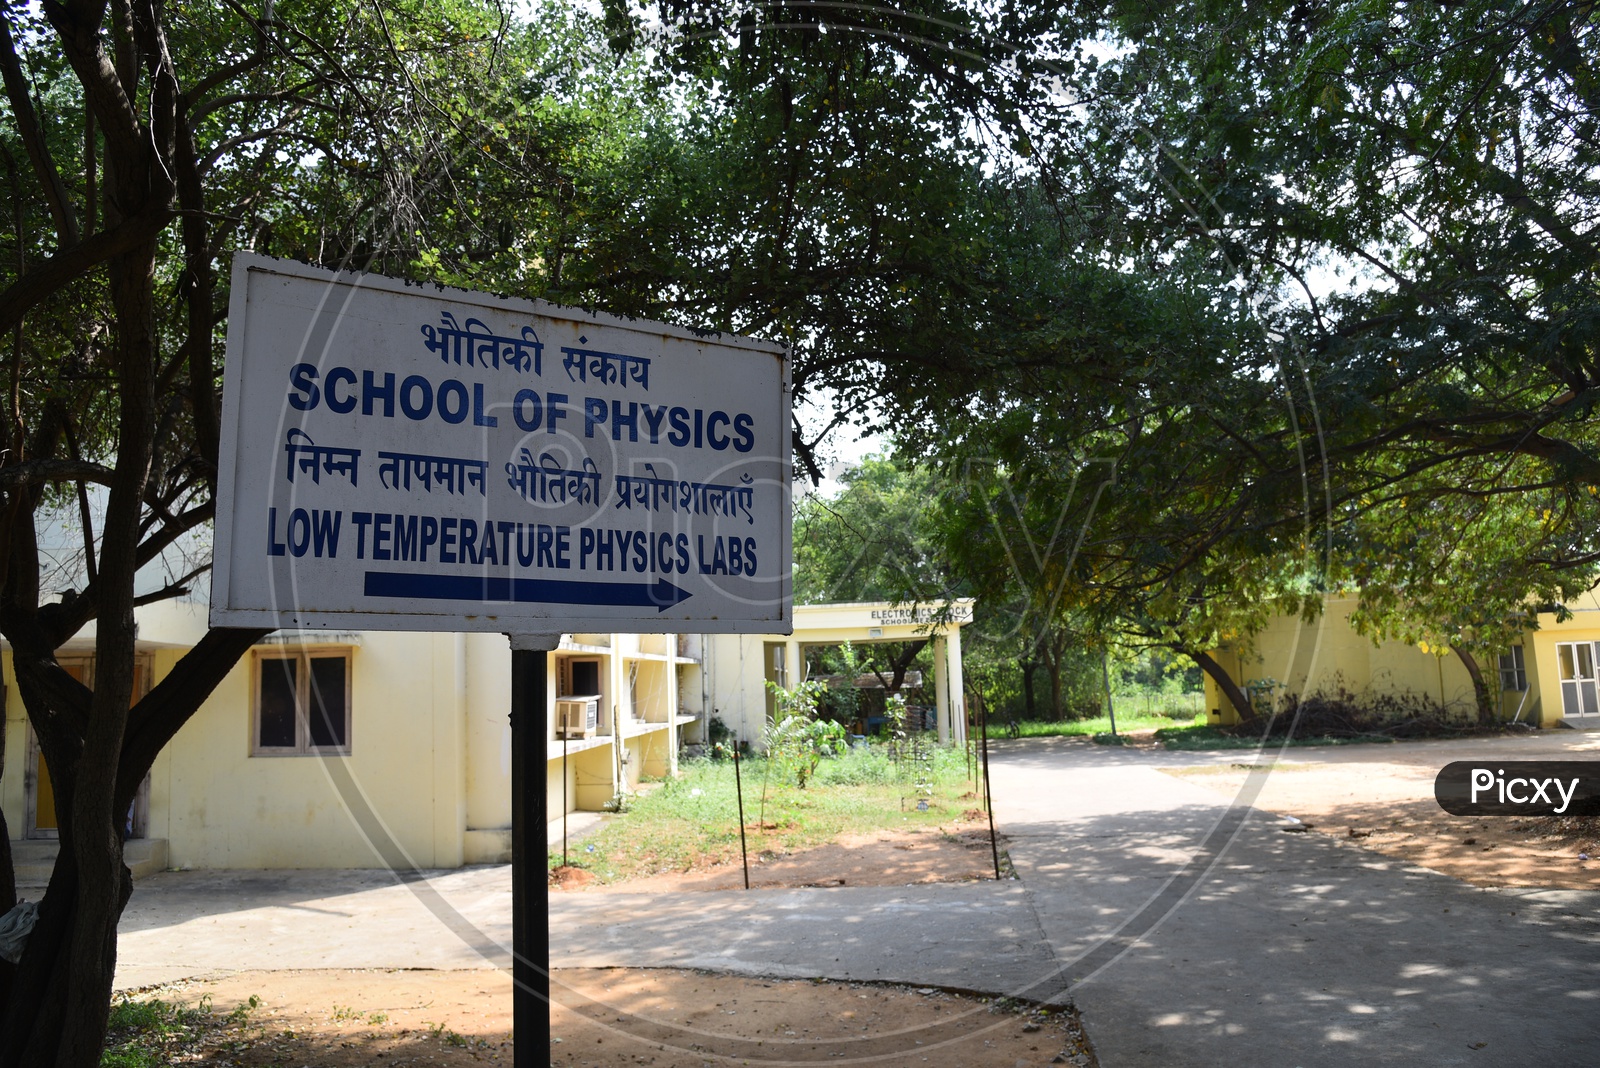 Low Temperature Physics Labs in School of Physics (University of Hyderabad)